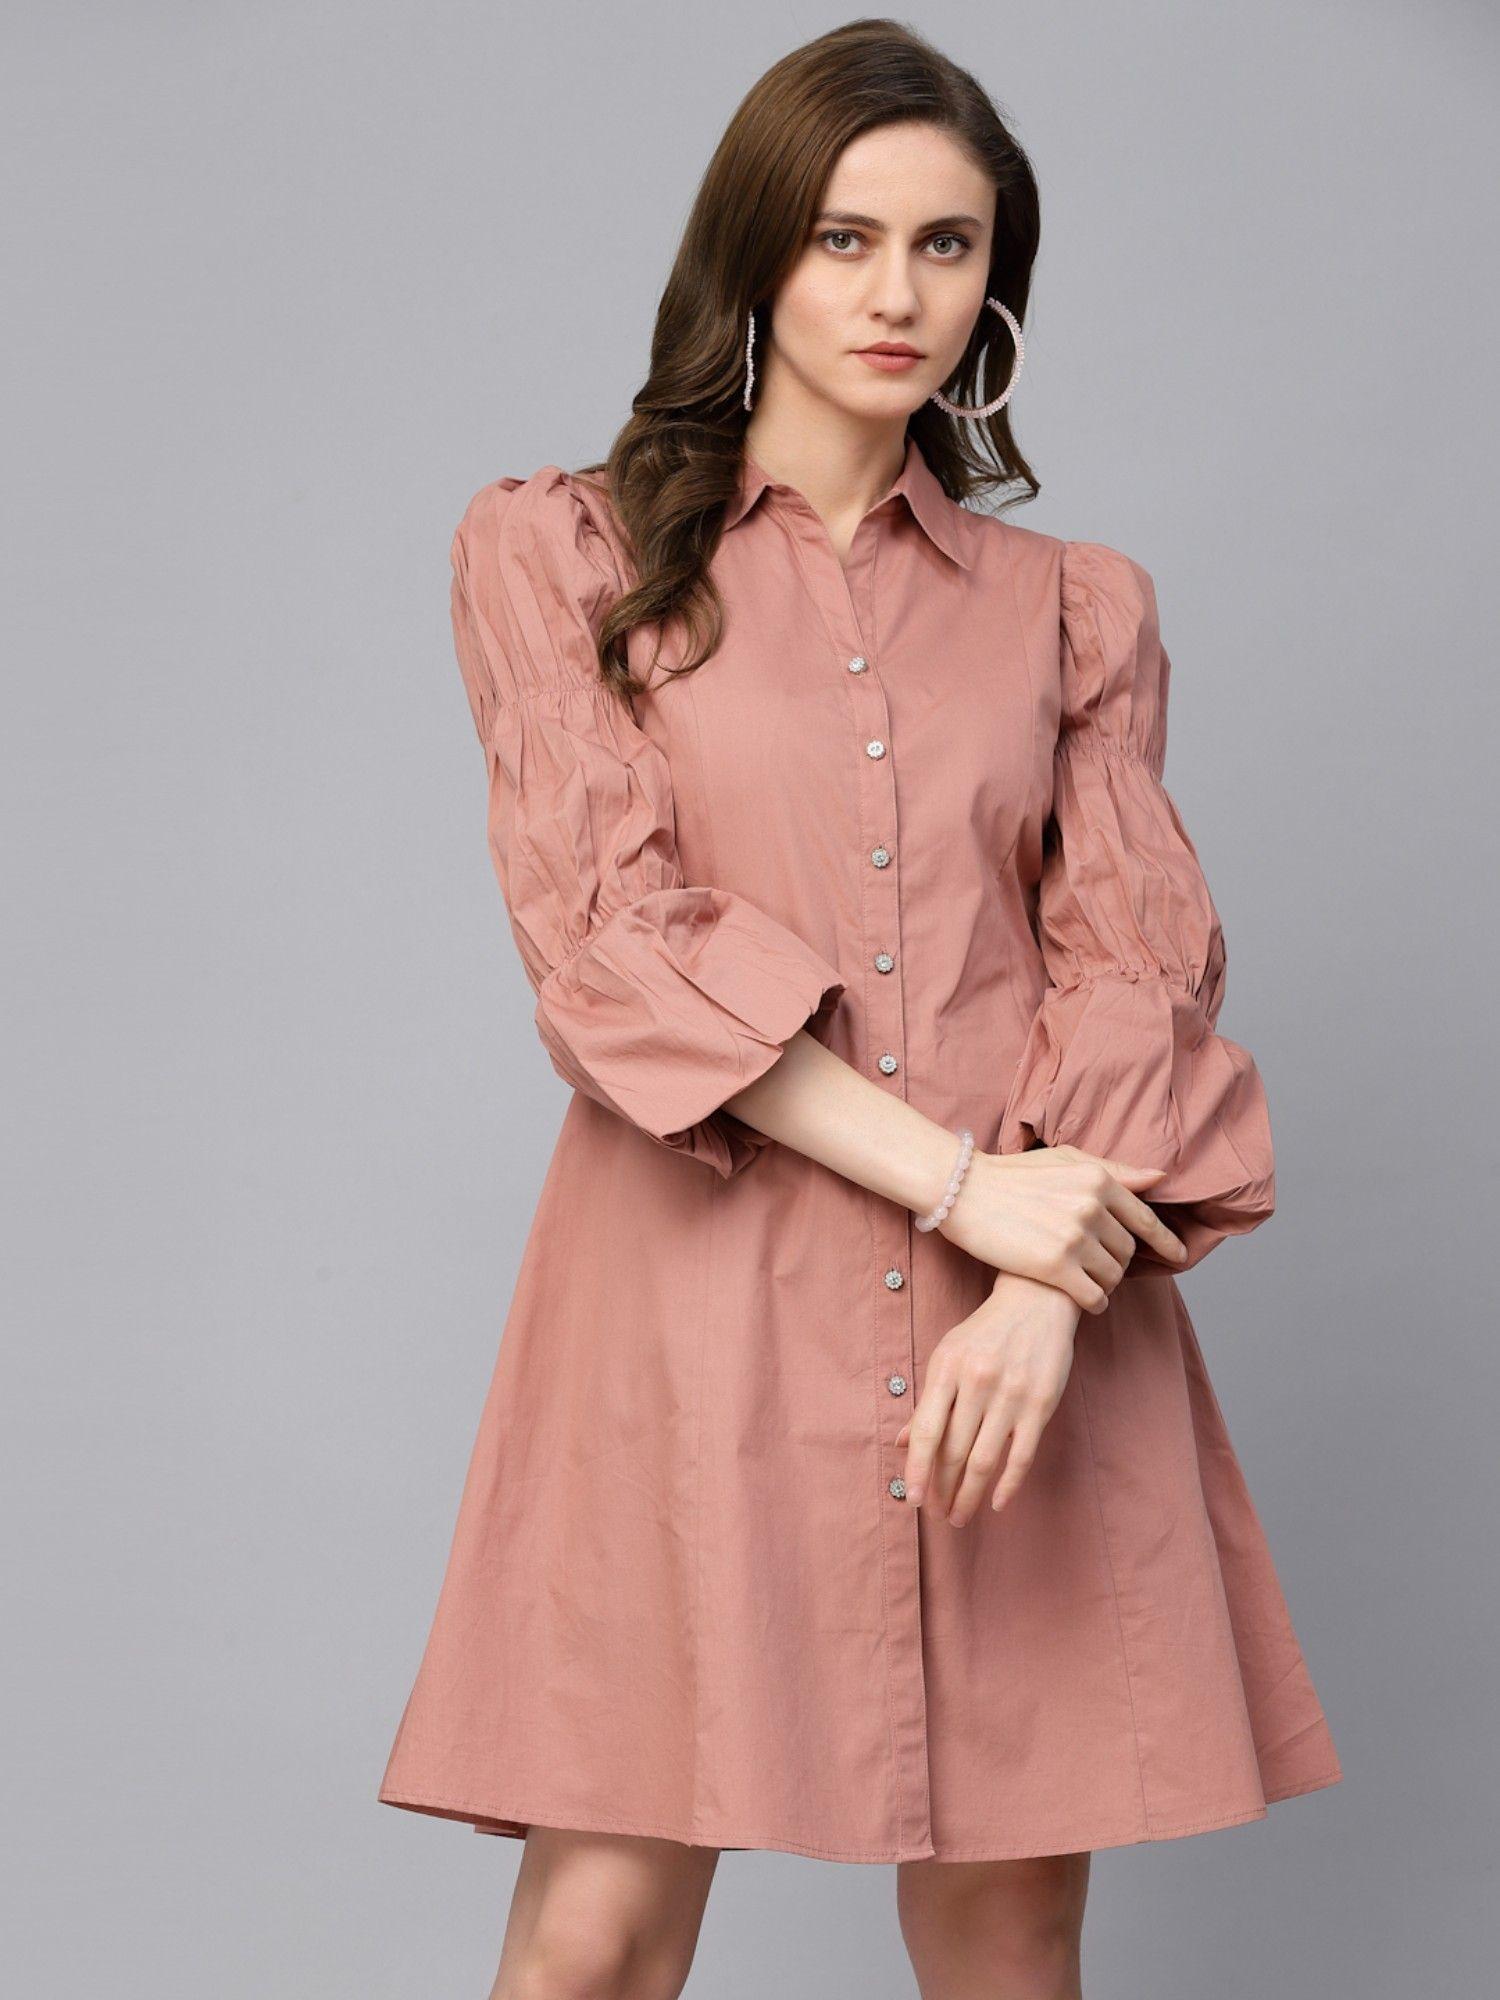 casual beige pink cotton dress for women